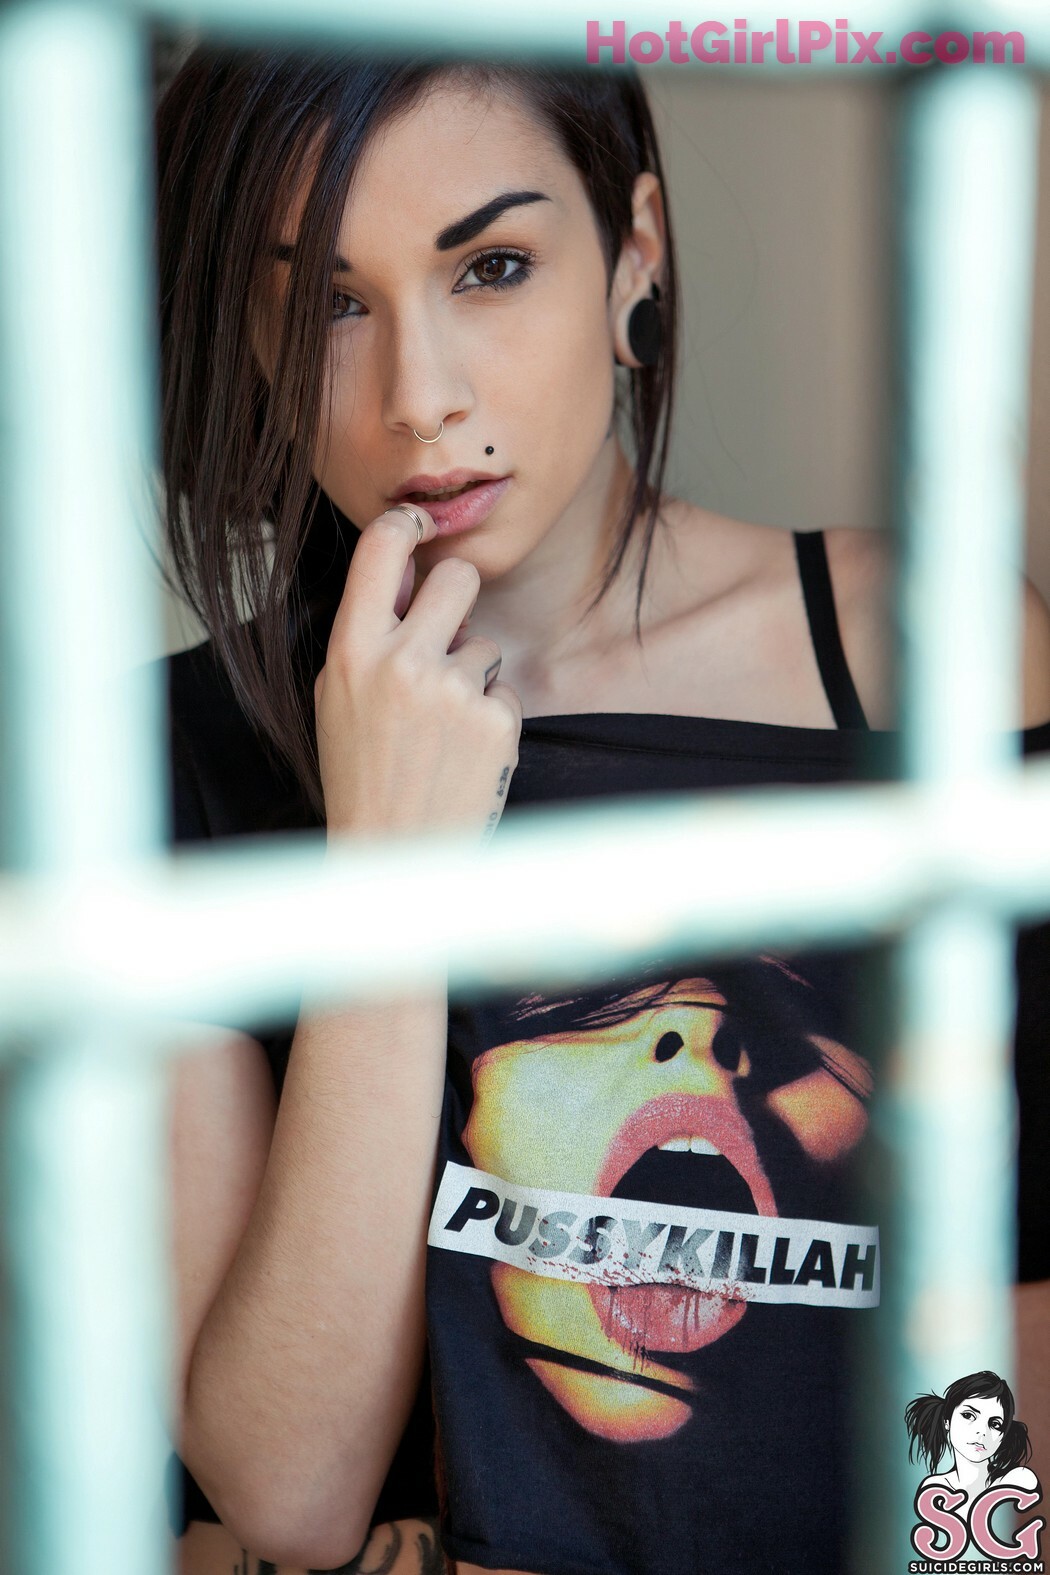 [Suicide Girls] Slim - Inside the cage